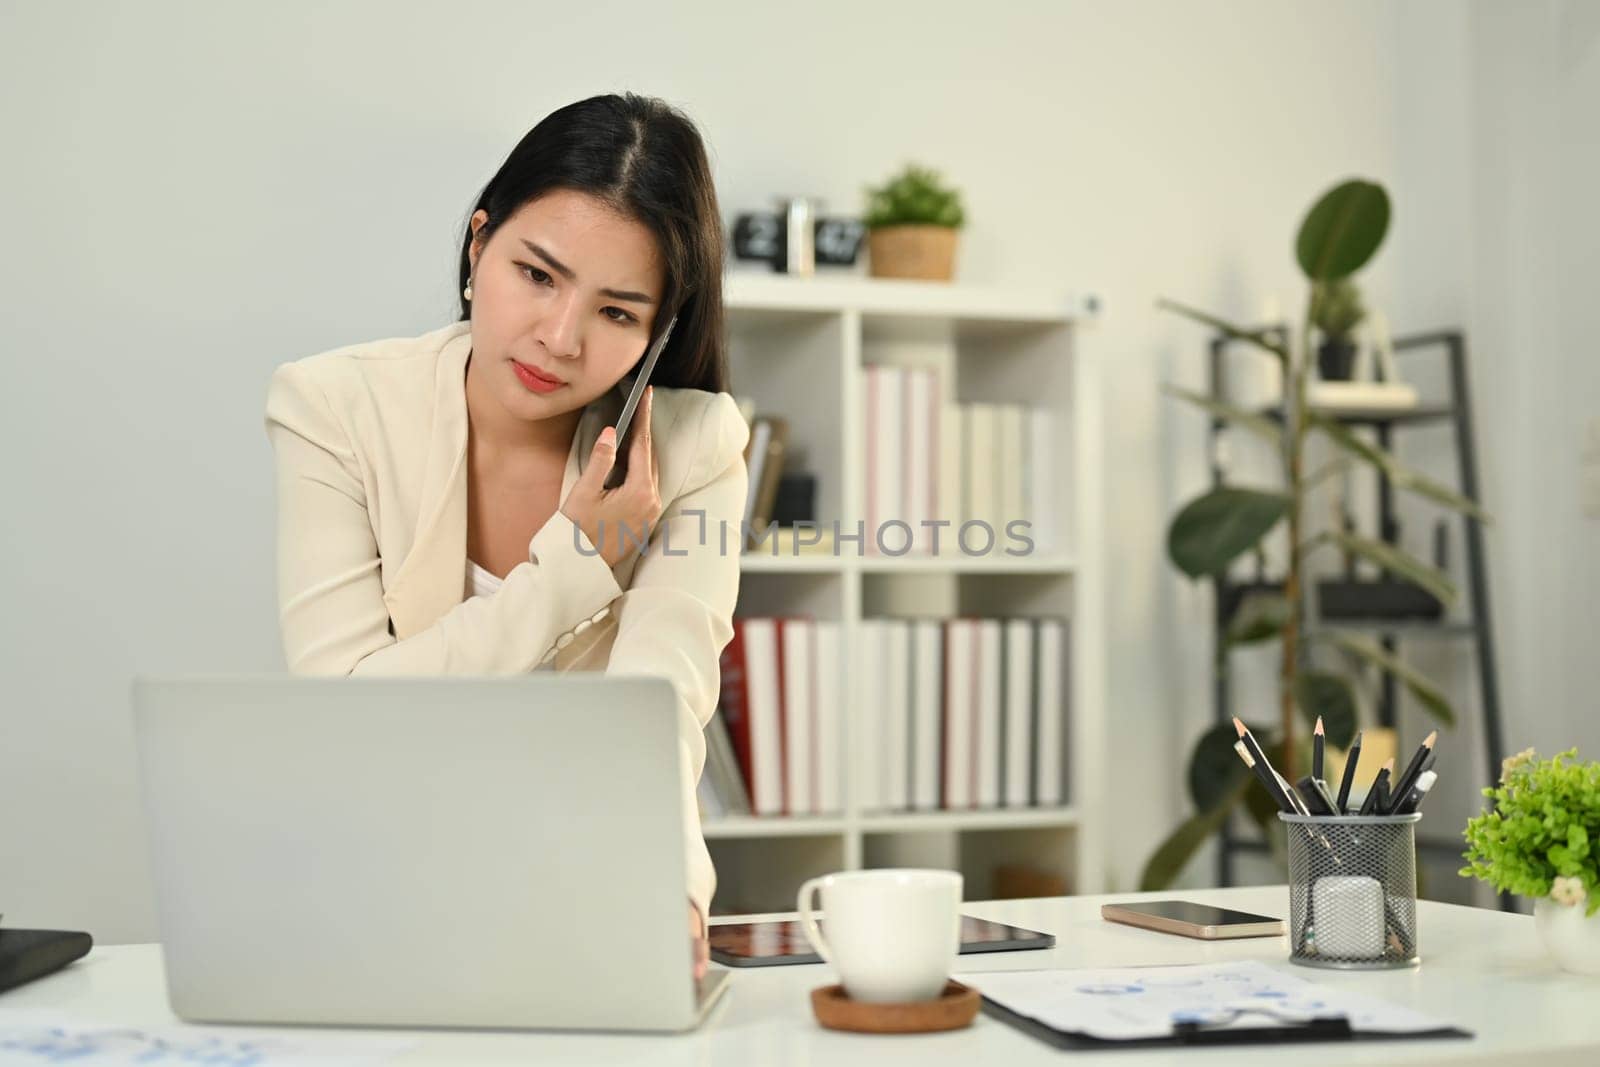 Serious female investment advisor having unpleasant phone conversation, consulting client at working desk.